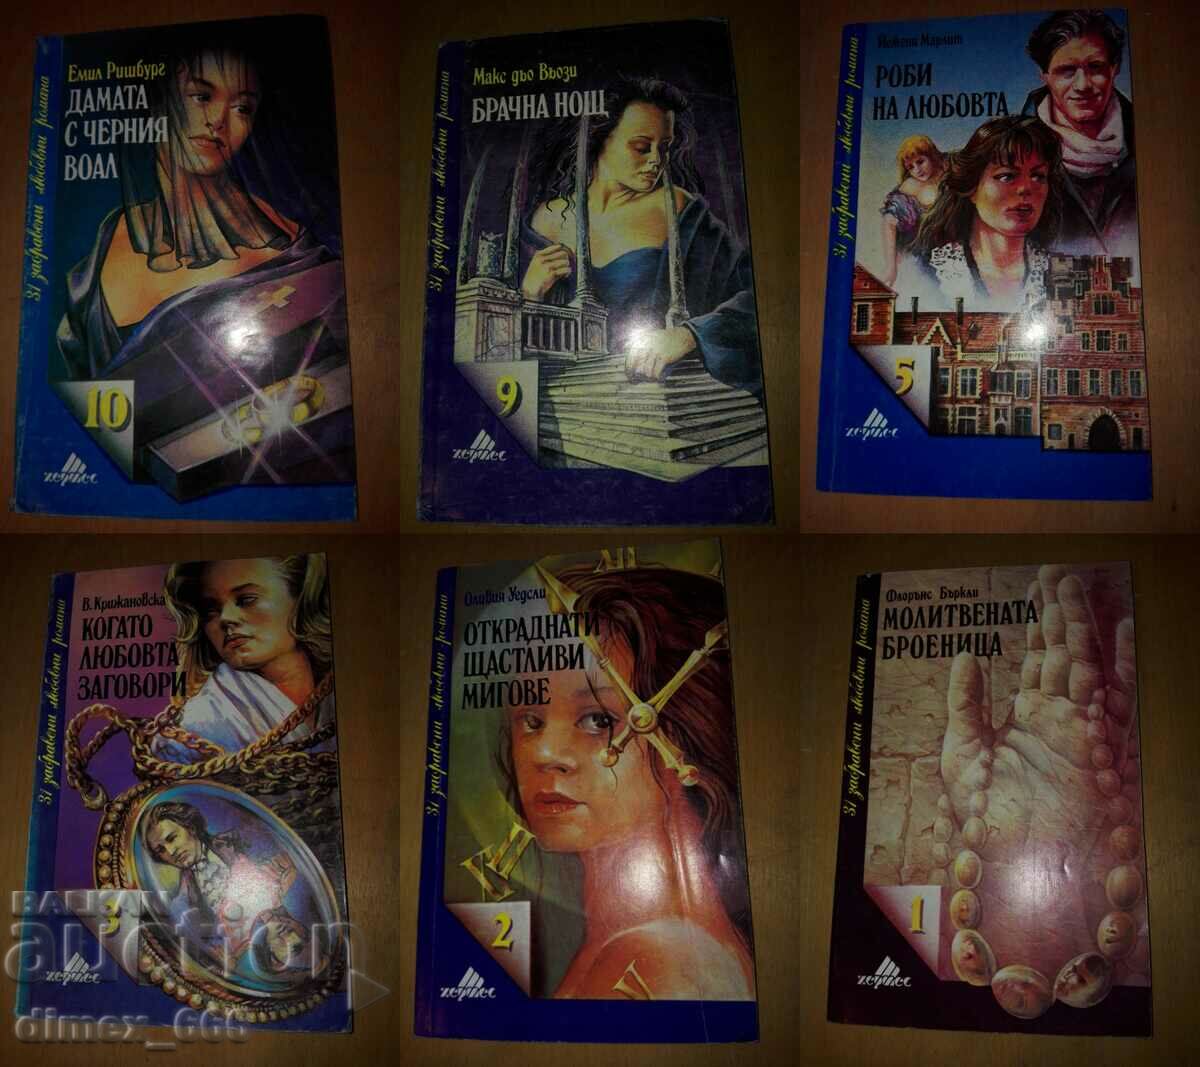 Lot of 6 books from the series "31 Forgotten Romance Novels"